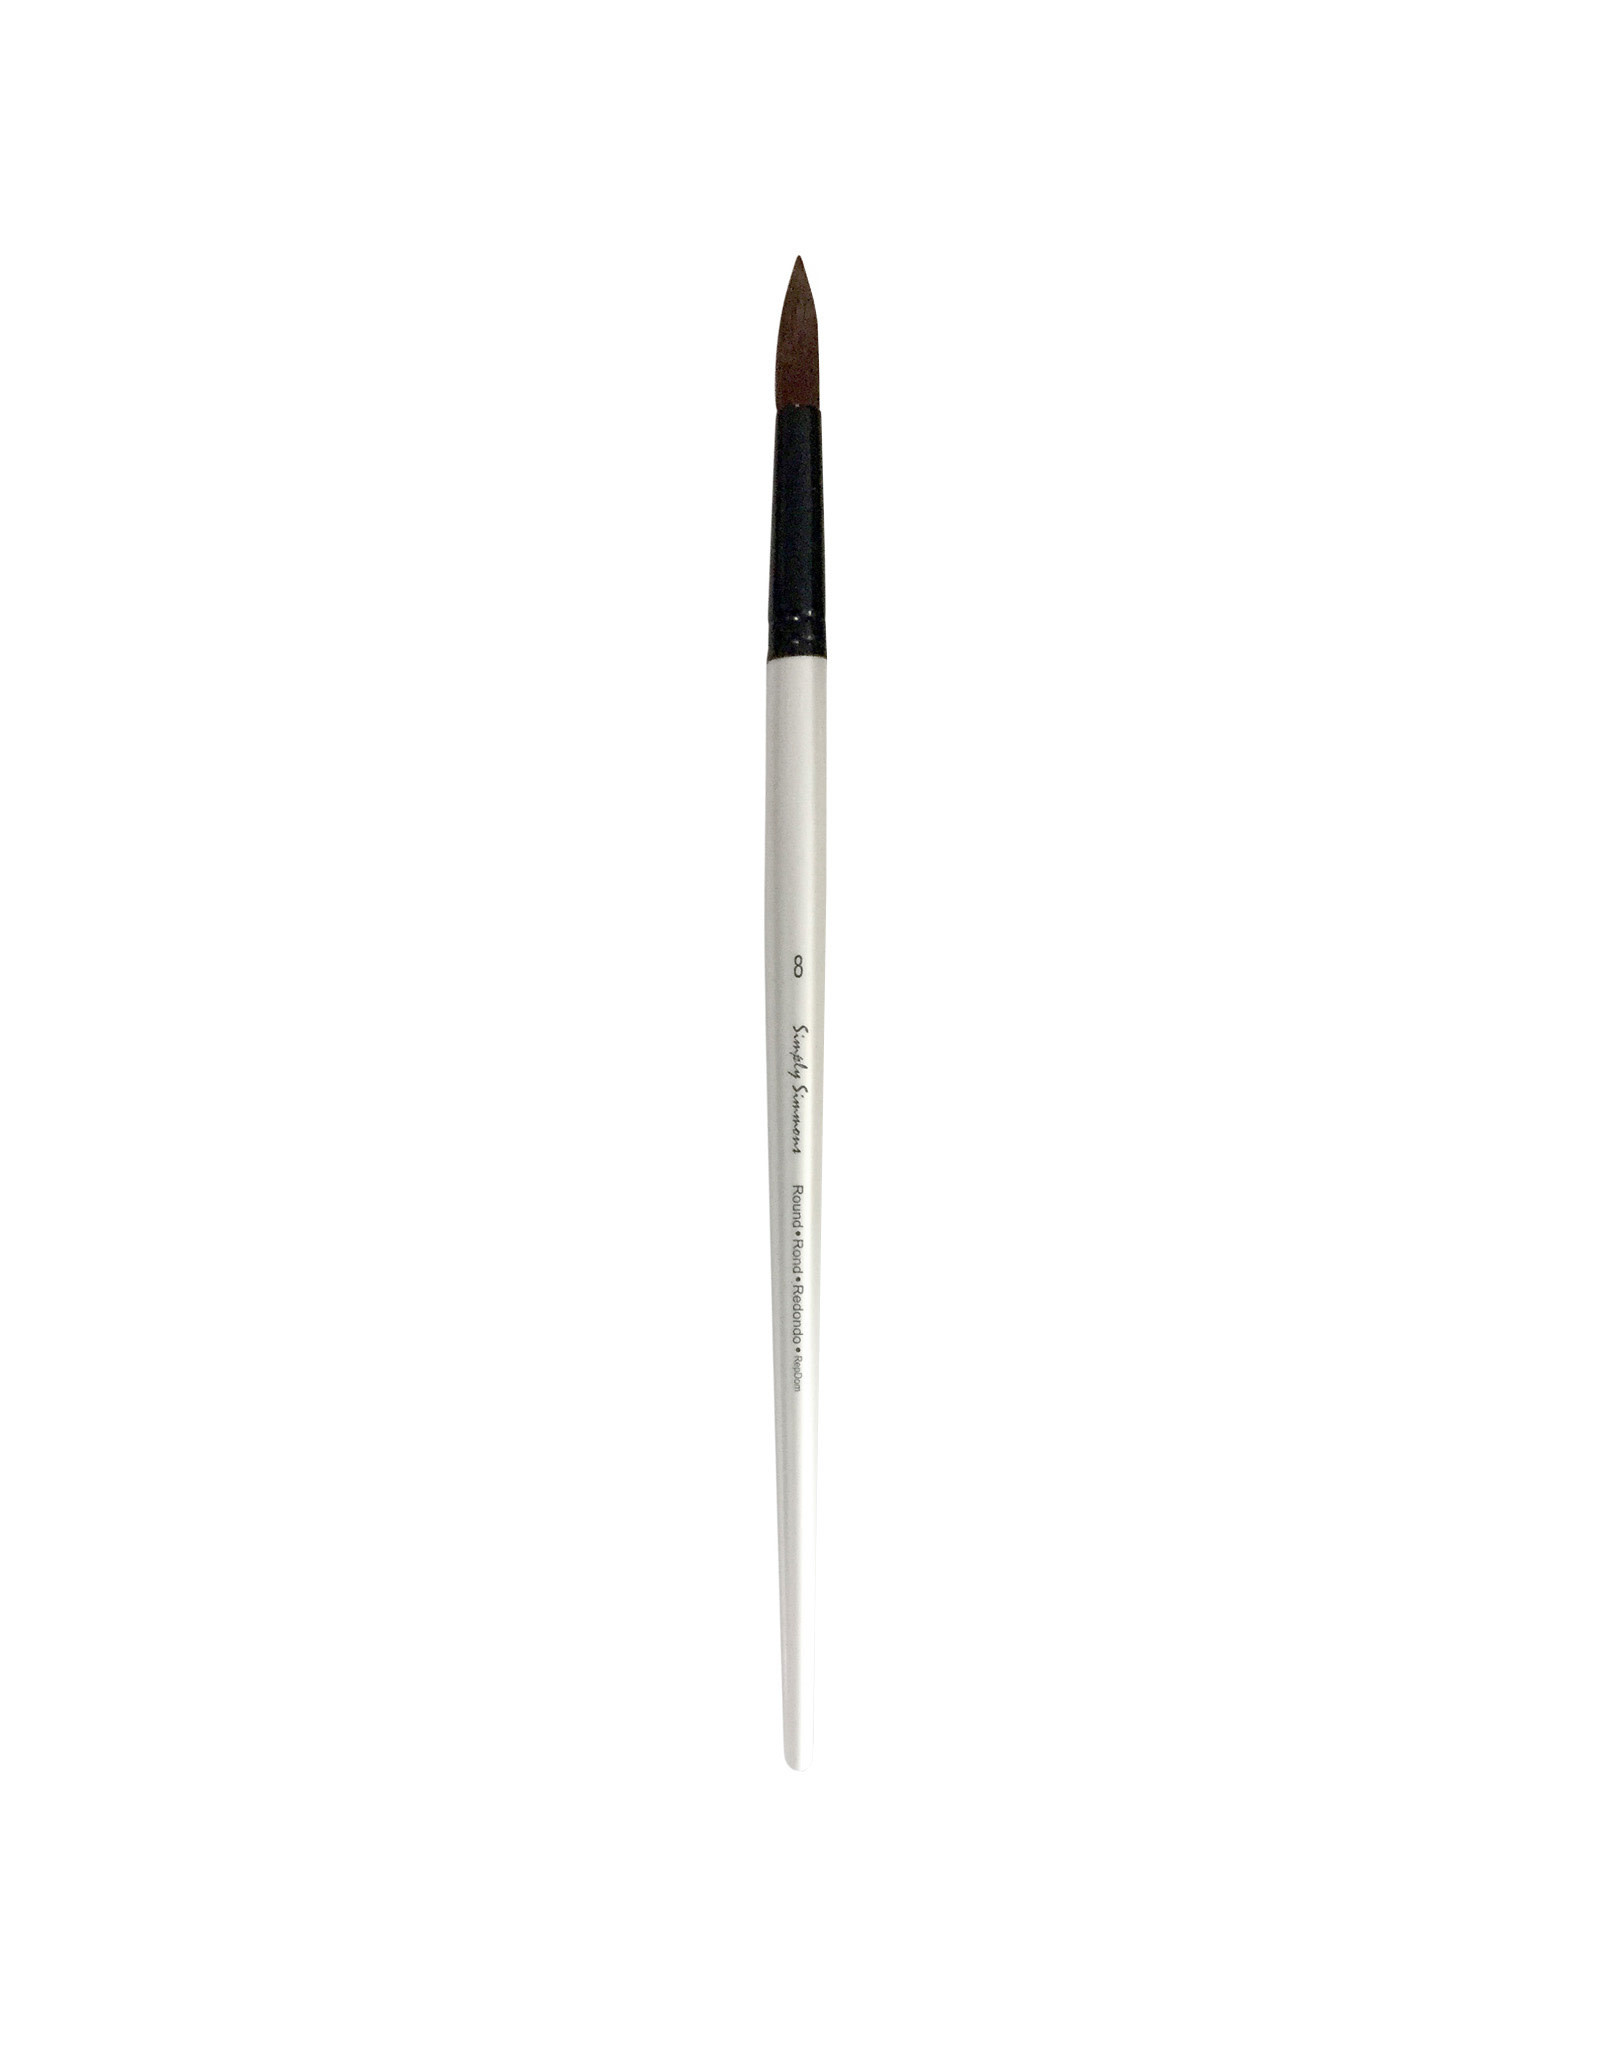 Daler-Rowney Simply Simmons Long Handle Stiff Round # 8